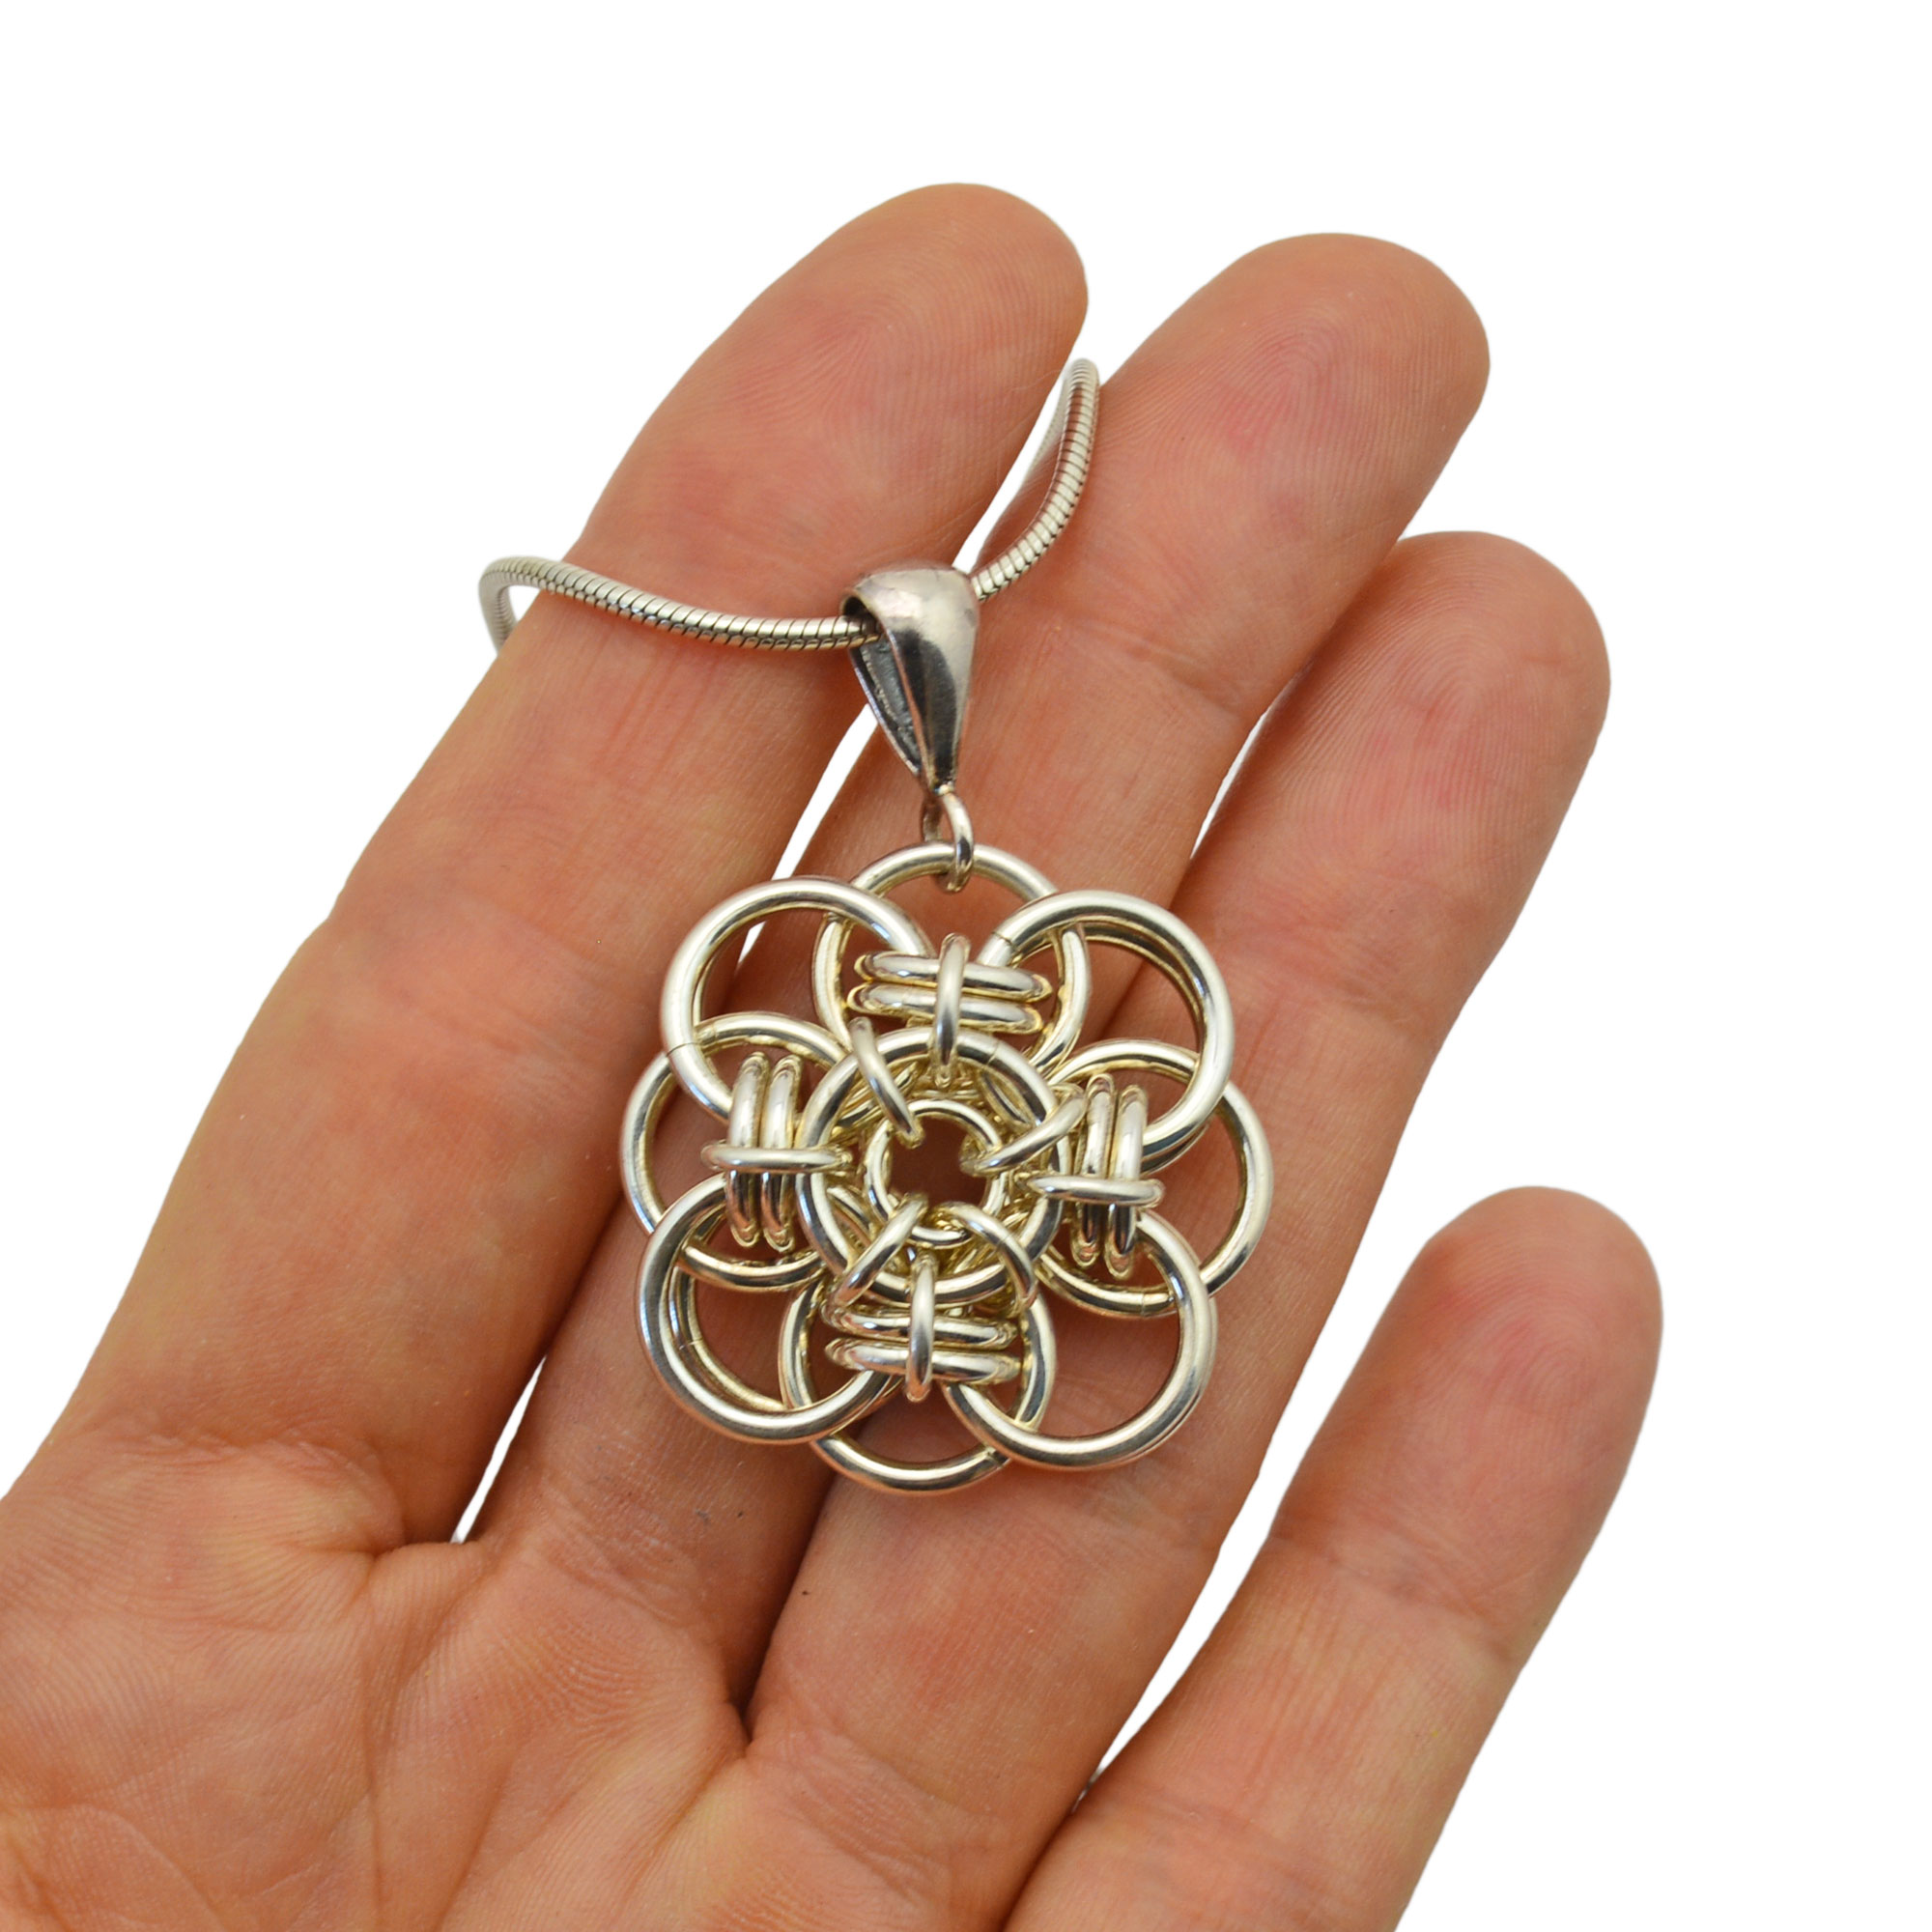 quantum rose sterling silver pendant in palm